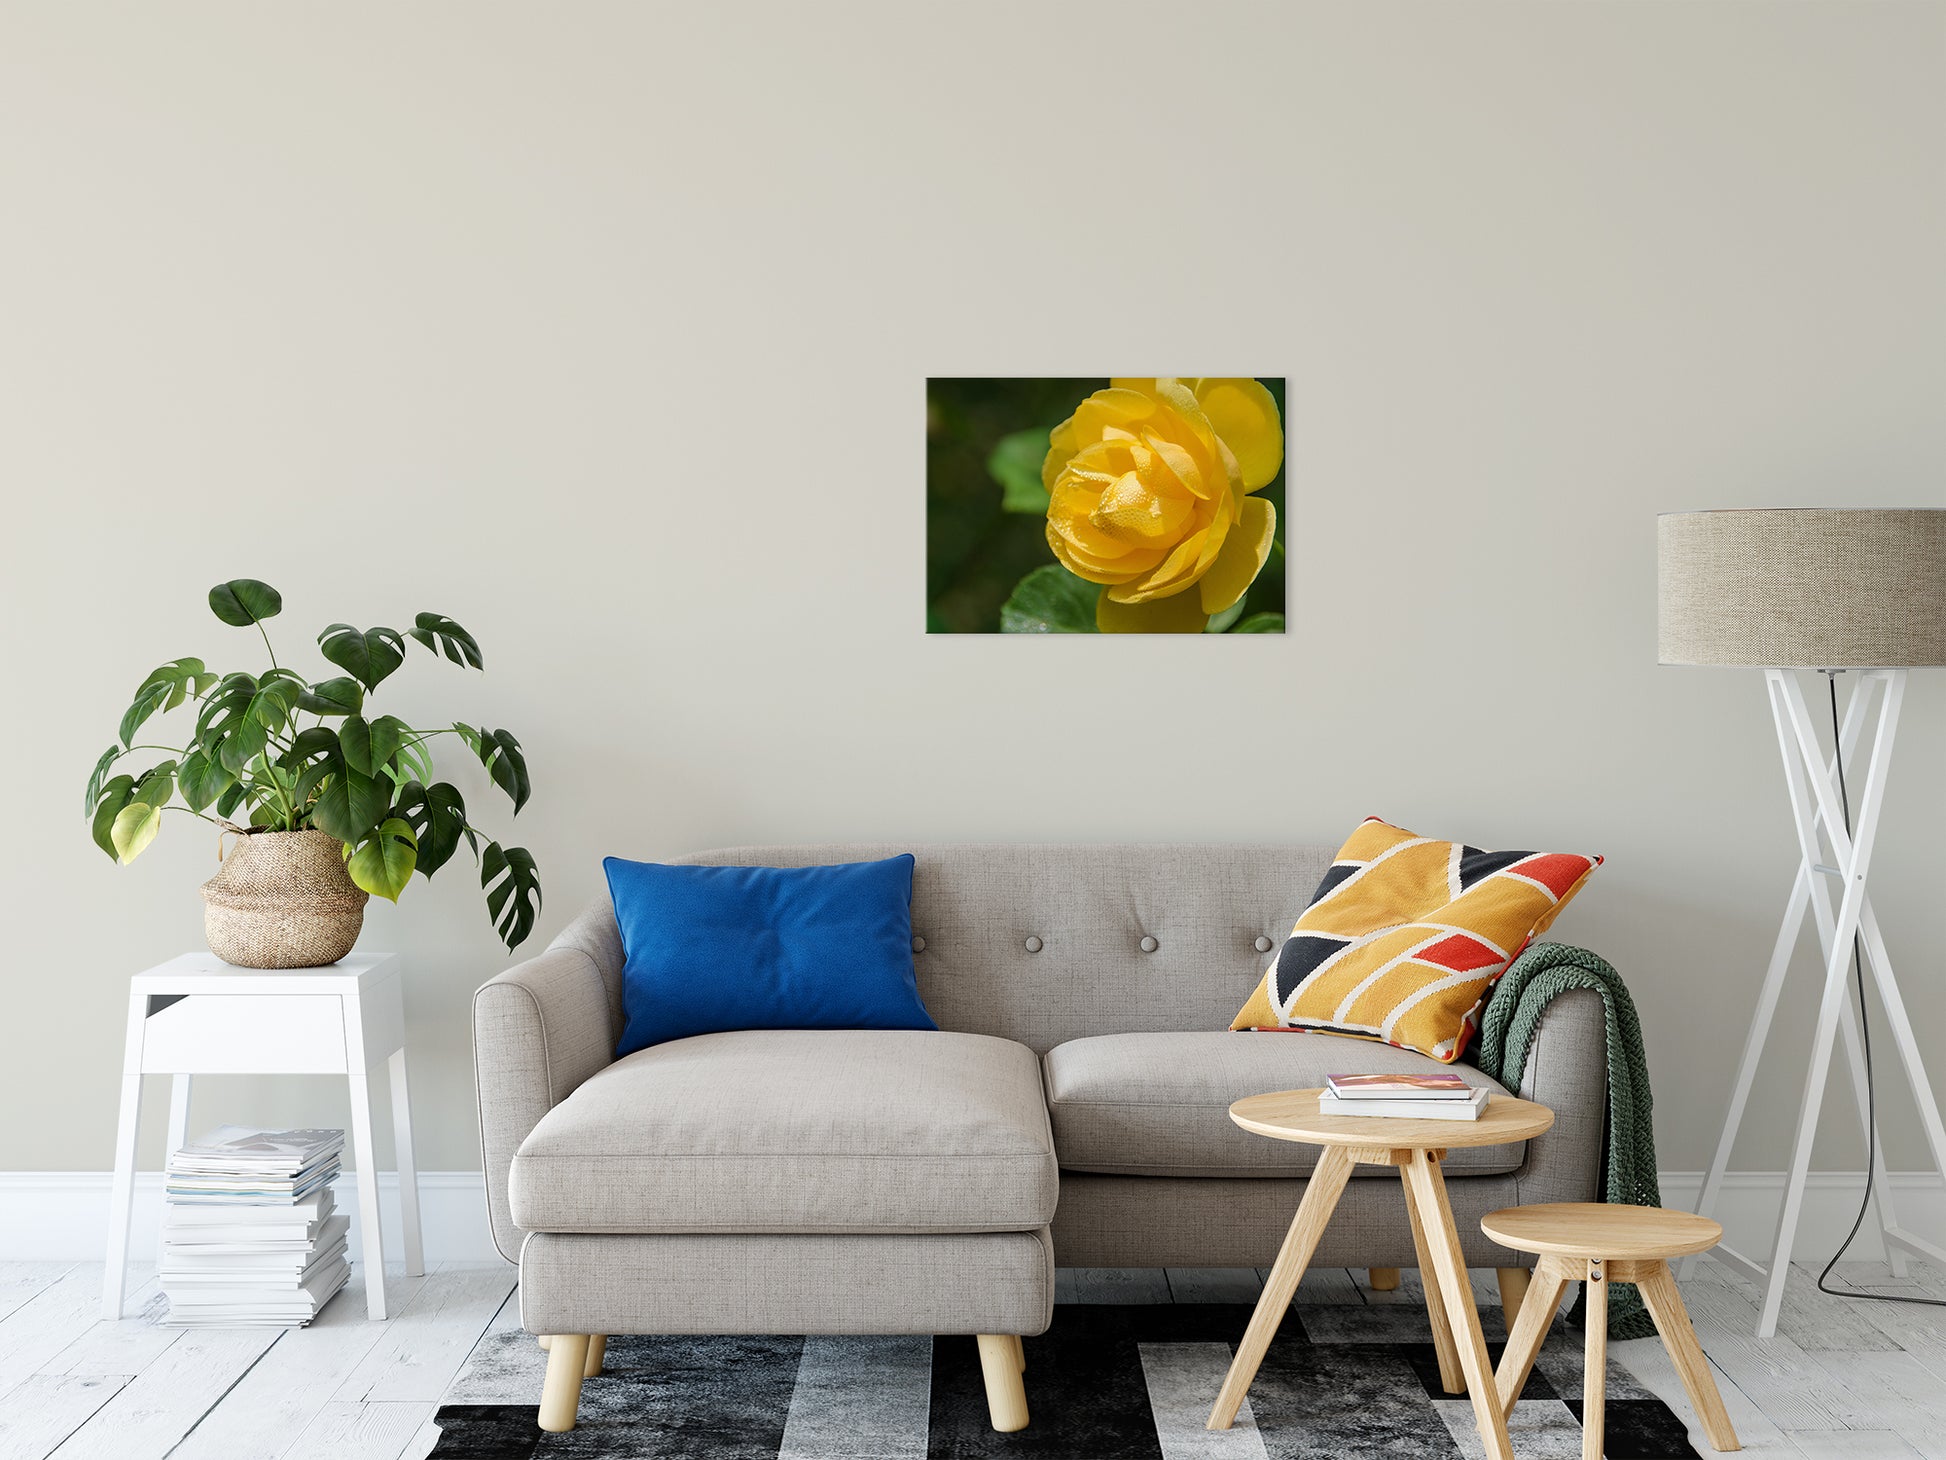 Friendship Rose Nature / Floral Photo Fine Art Canvas Wall Art Prints 20" x 24" - PIPAFINEART